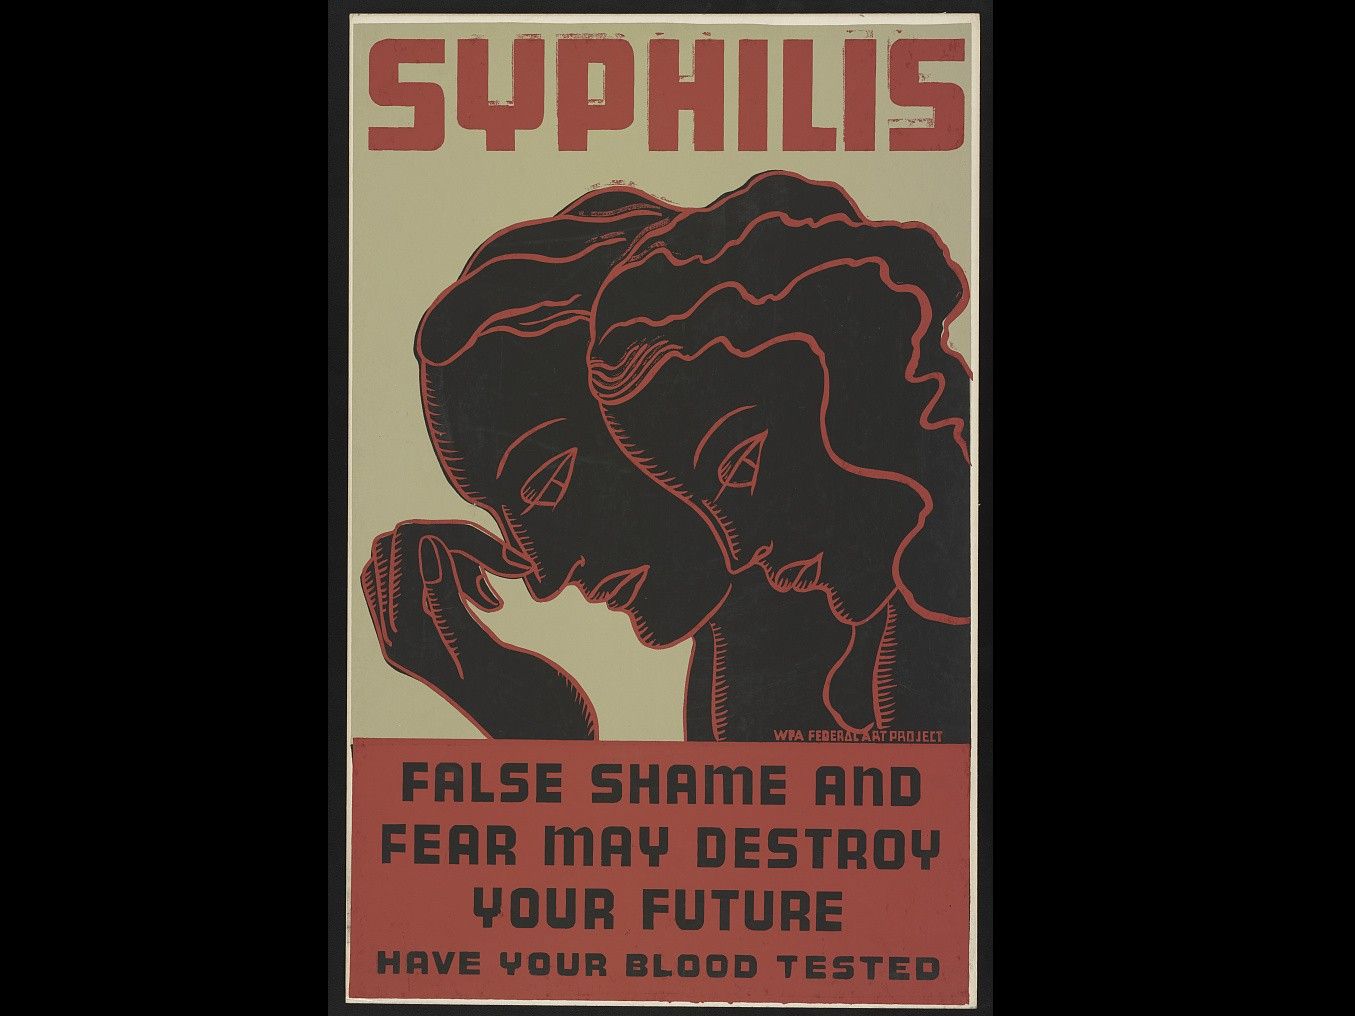 A WPA Federal Art Project poster on syphilis from 1938. Rates in Alberta have shot-up to numbers not seen since the 1940s.